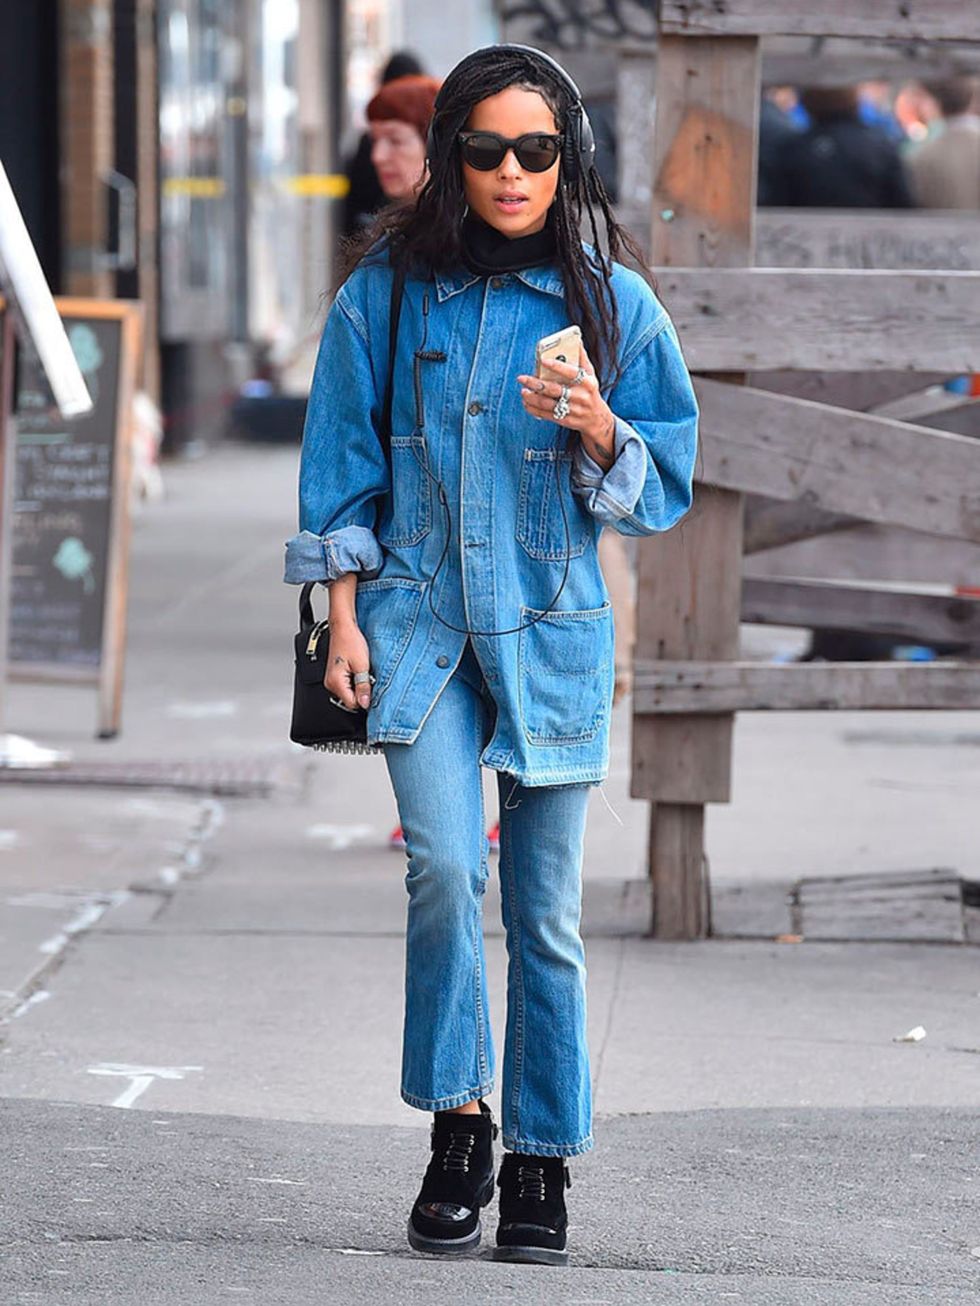 Zoe Kravitz out and about in New York March 2016.